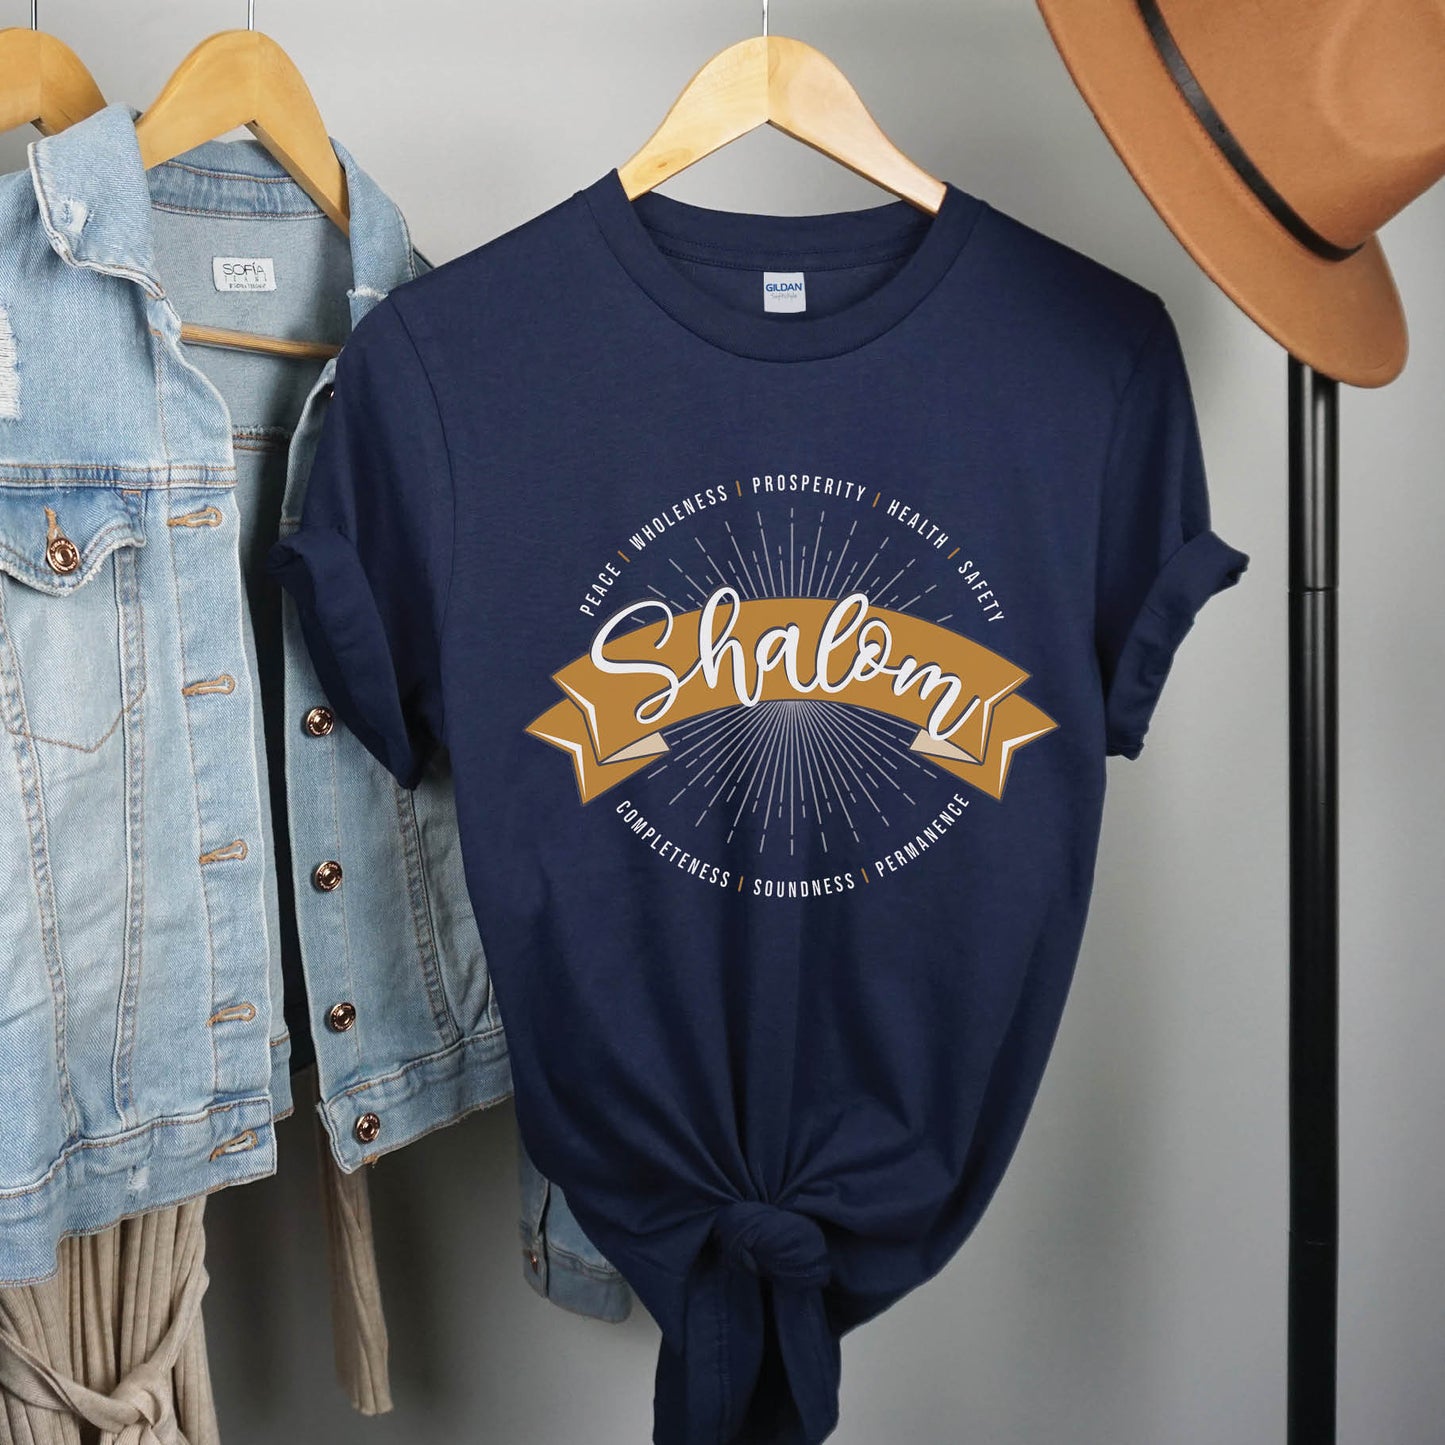 Soft navy blue faith-based Christian women's unisex t-shirt with a gold banner and sunburst design that says the Biblical Hebrew meaning of the word "SHALOM" - Peace, Completeness, Prosperity, Health, Safety, Wholeness, Soundness, and Permanence definition, makes a great mother's day gift for mom!